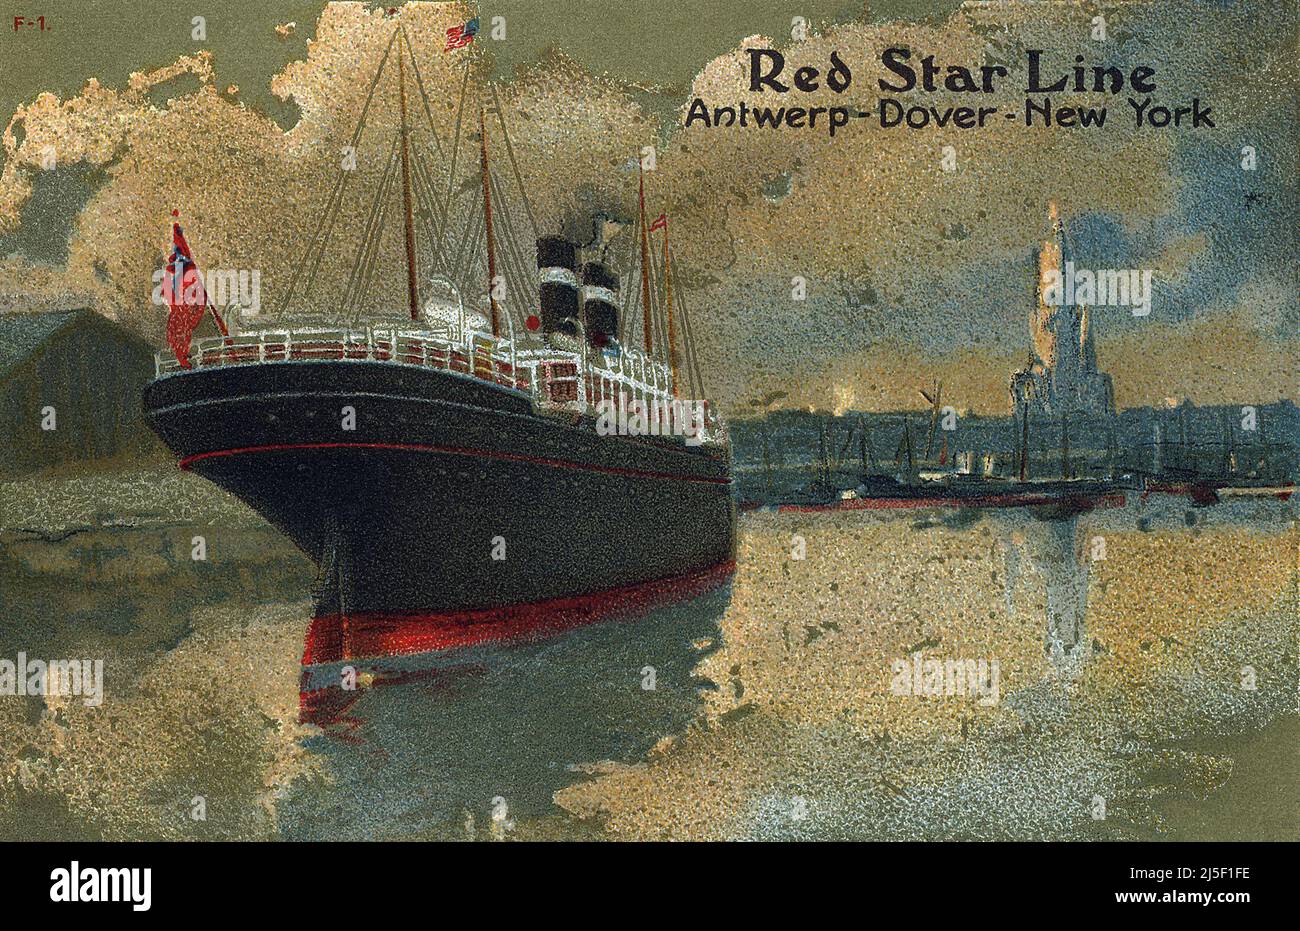 Vintage postcard promoting the Red Star Line shipping services between Antwerp, Dover and New York. Stock Photo